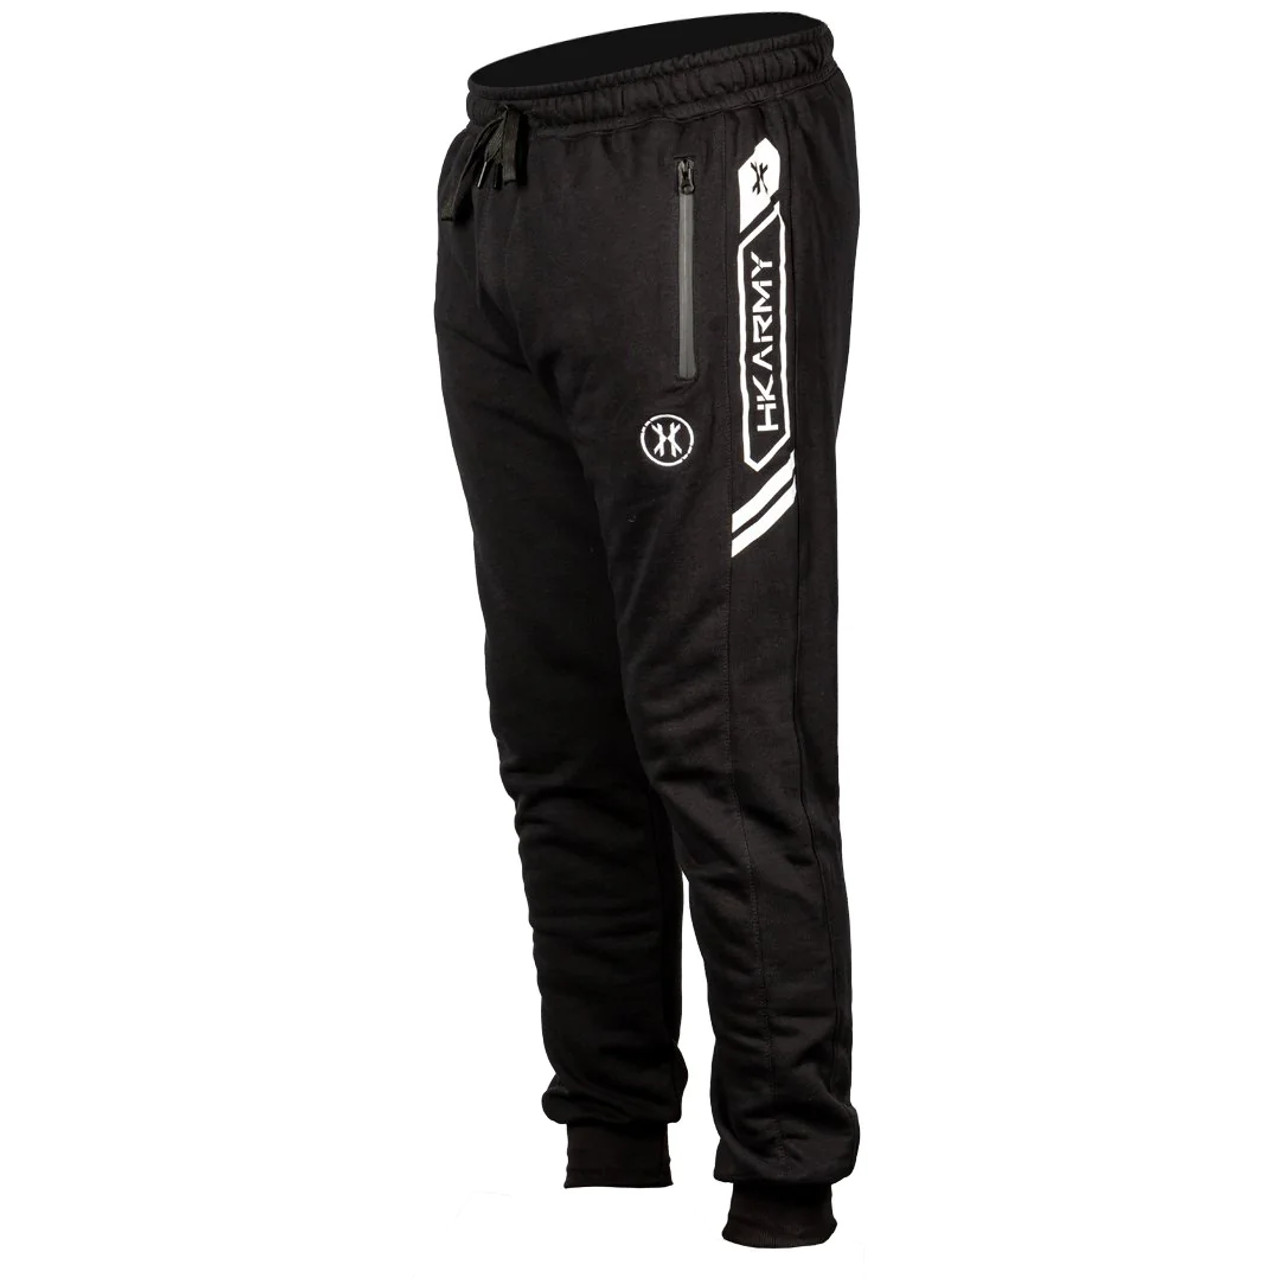 Athletex - Stride - Jogger Pants - PAINTBALL DIRECT